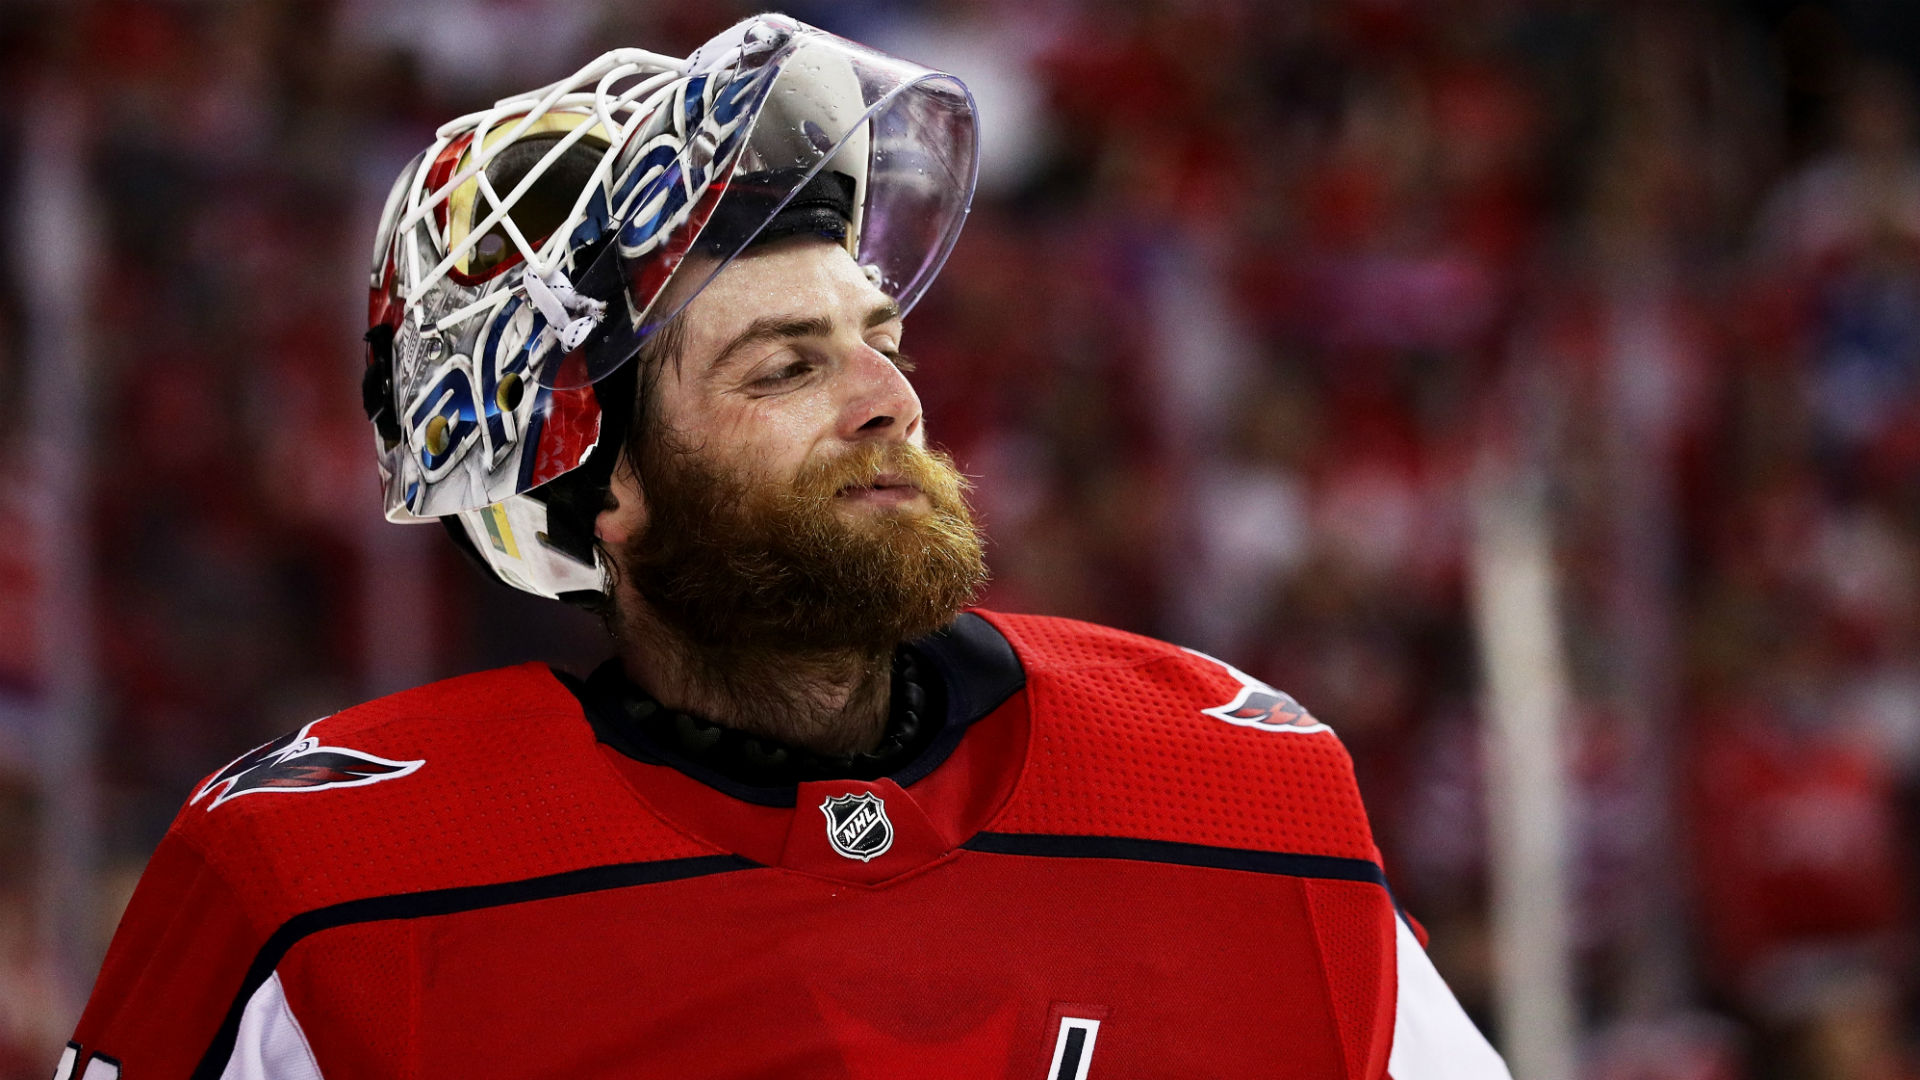 NHL playoffs 2018: Capitals' Braden Holtby makes 24 saves, records first shutout of ...1920 x 1080